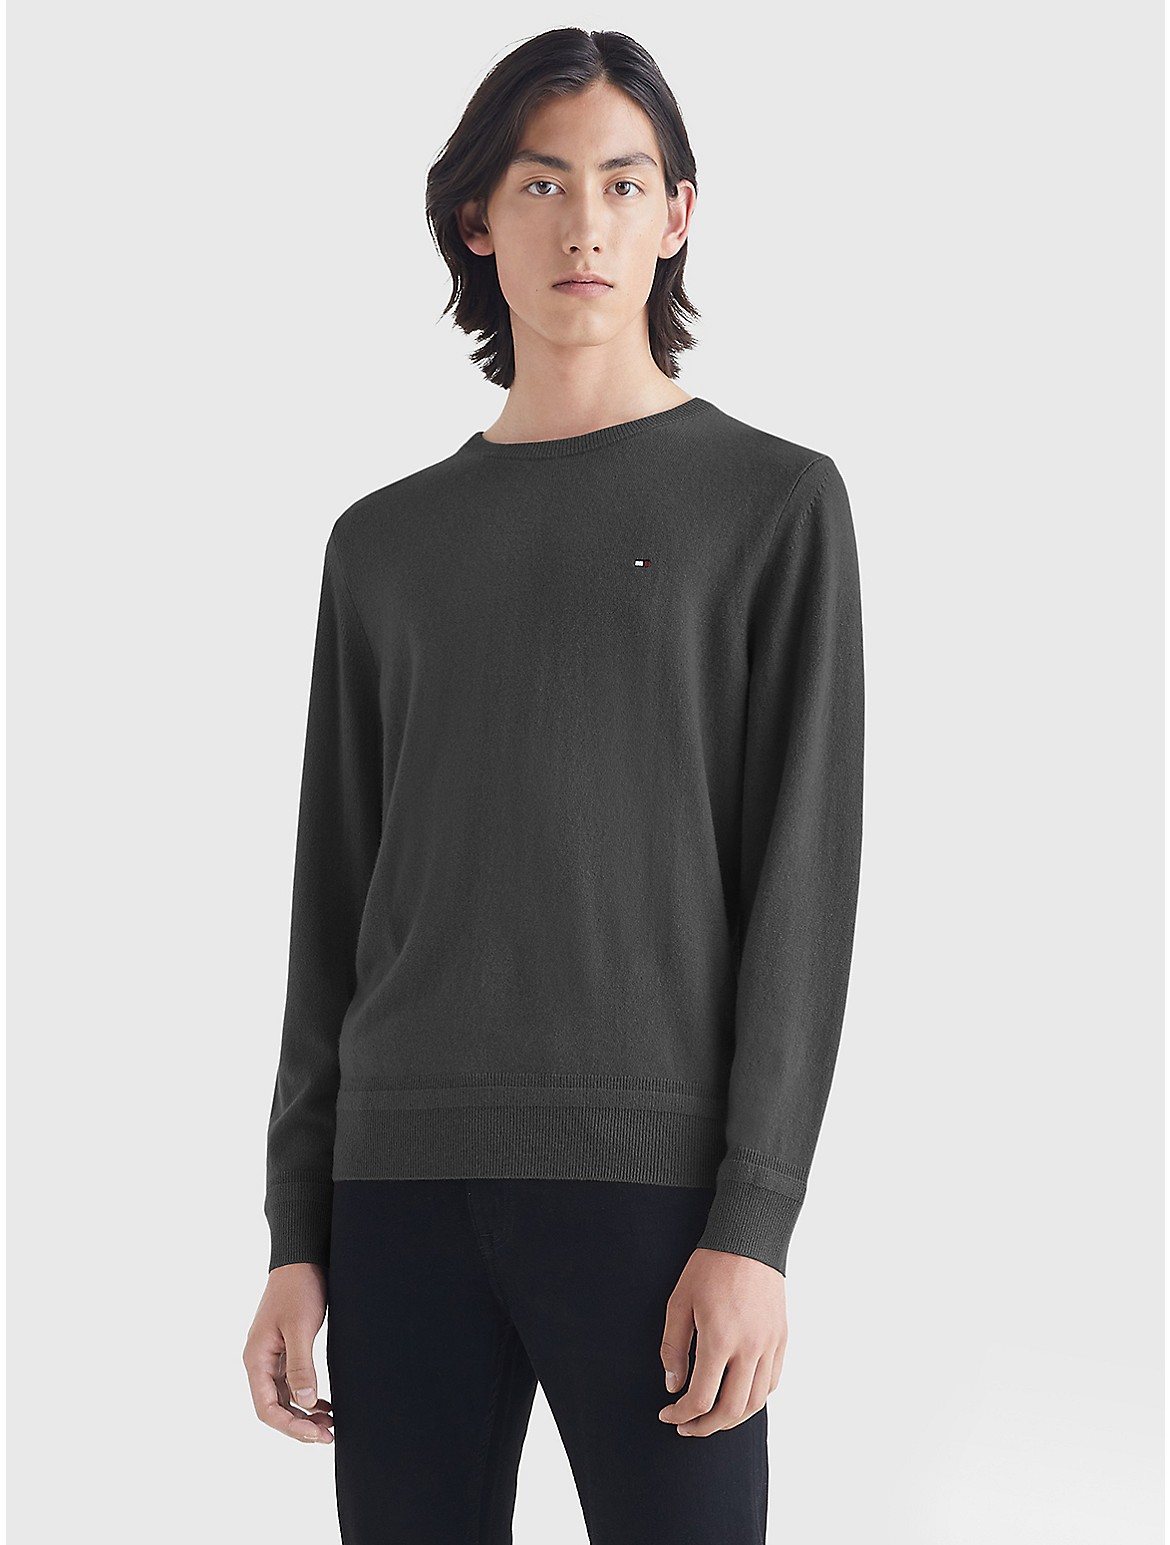 Tommy Hilfiger Men's Recycled Cashmere Crewneck Sweater